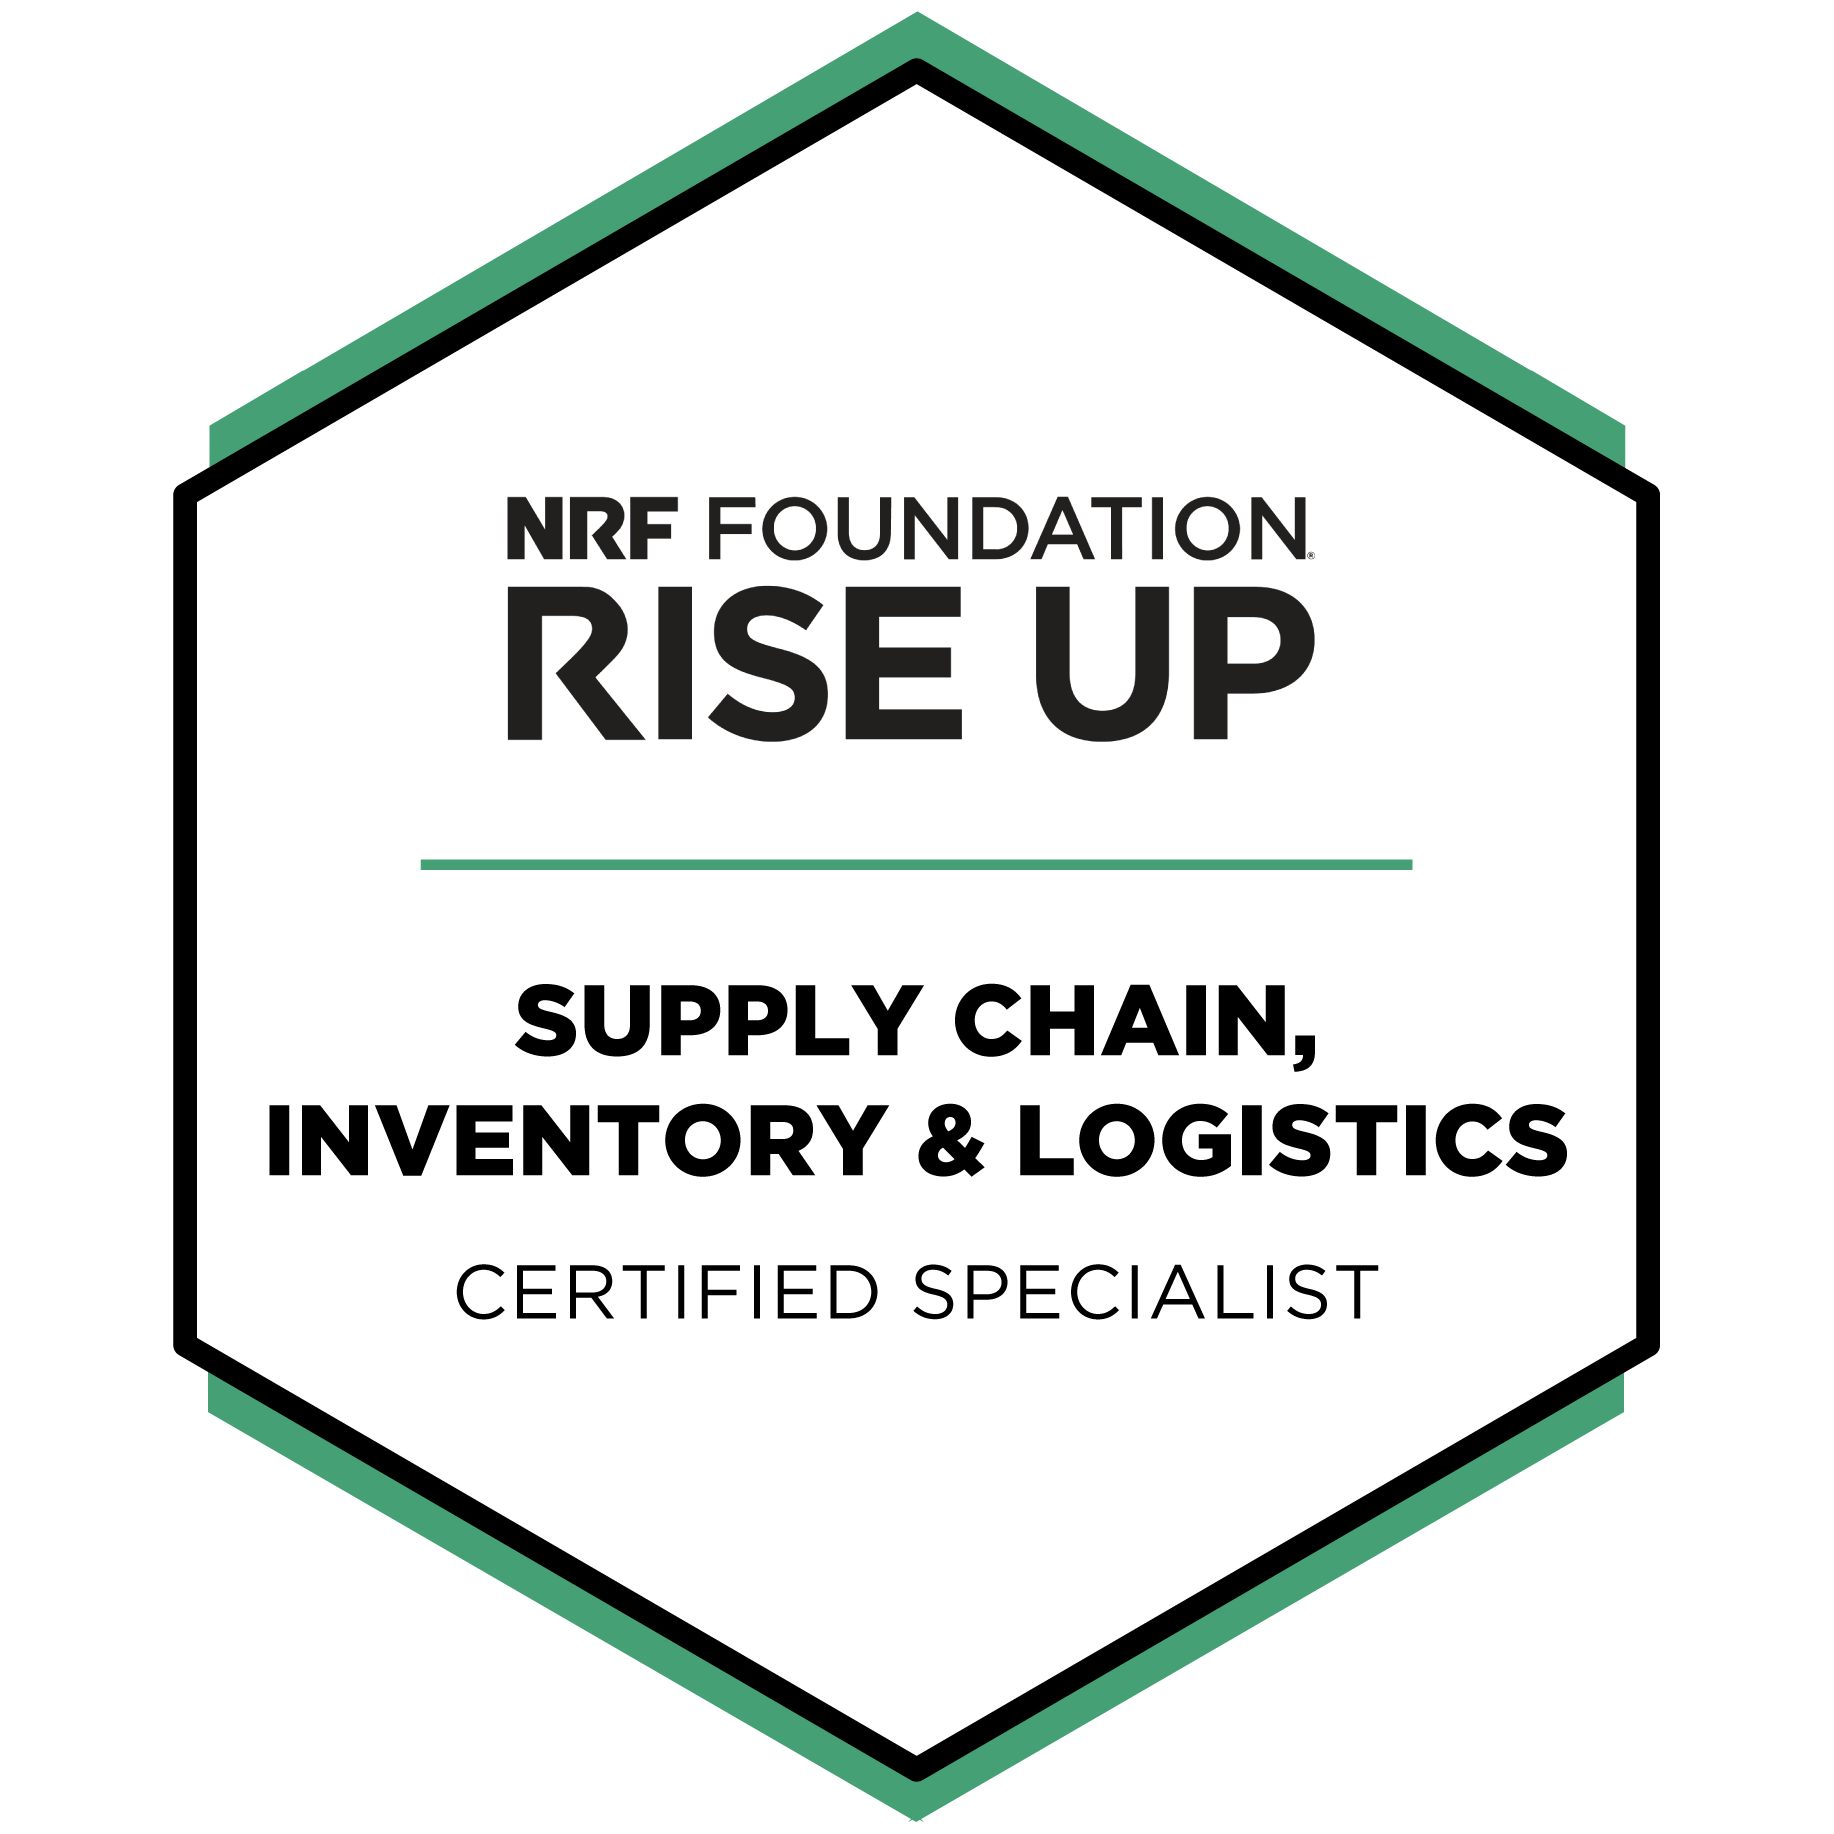 RISE Up Supply Chain, Inventory & Logistics